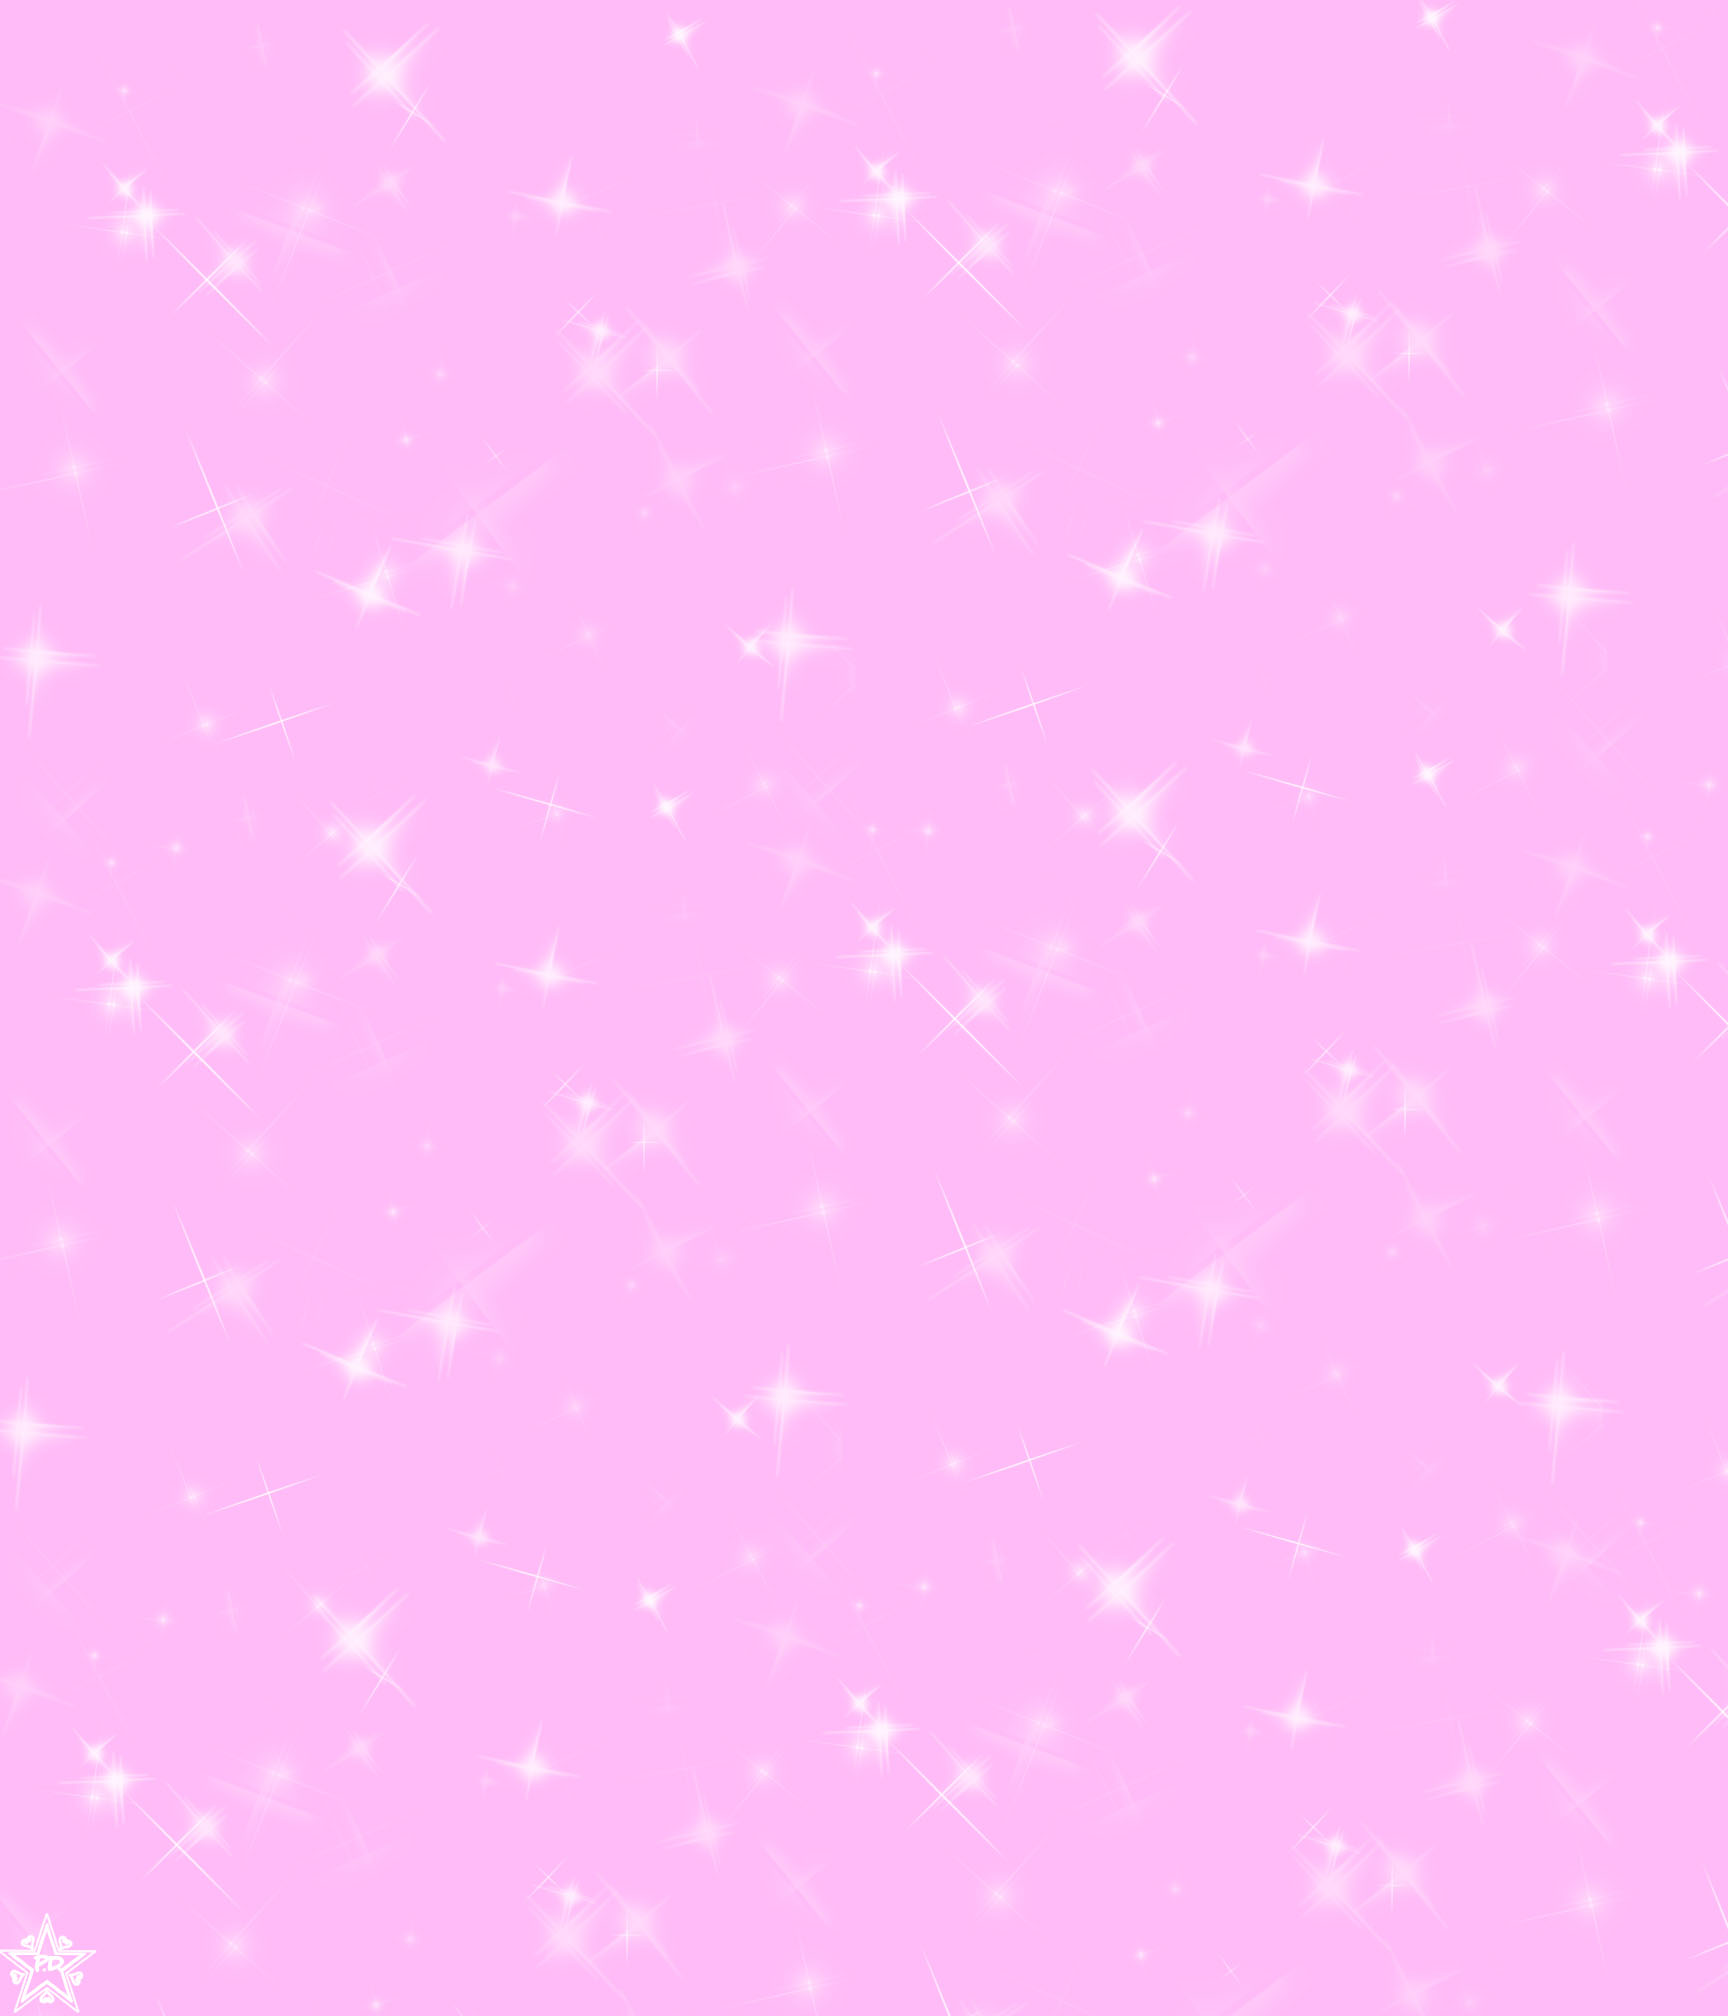 Pink Sparkly Backgrounds Pink sparkly background by